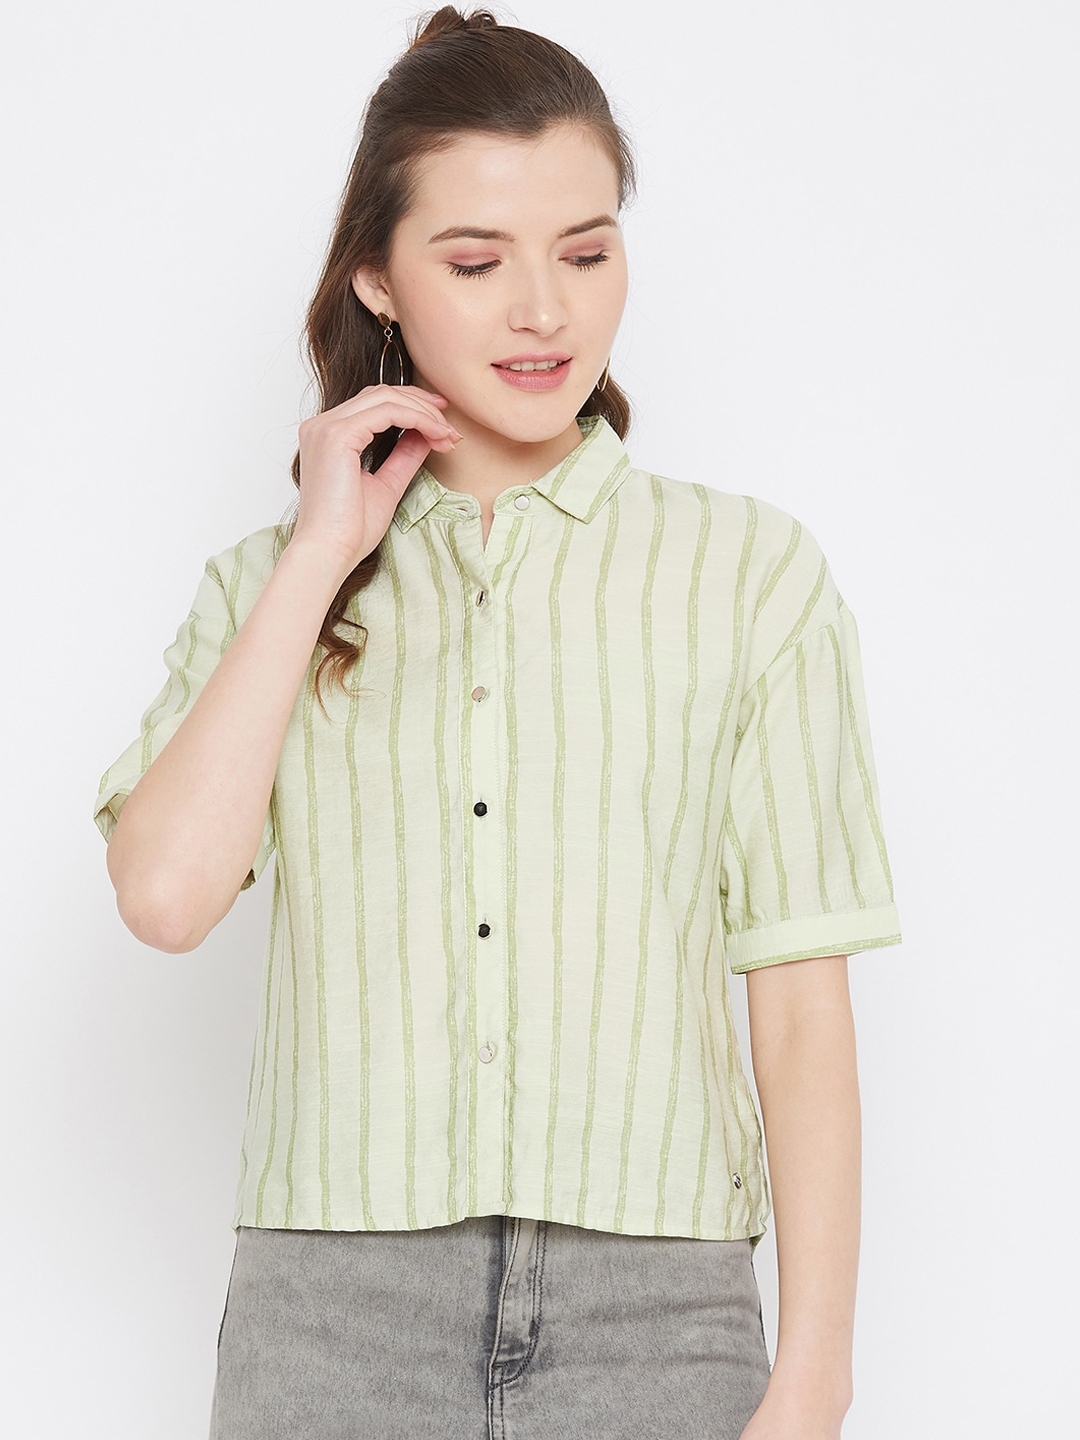 Buy Octave Green Striped Shirt Style Top - Tops for Women 13690016 | Myntra